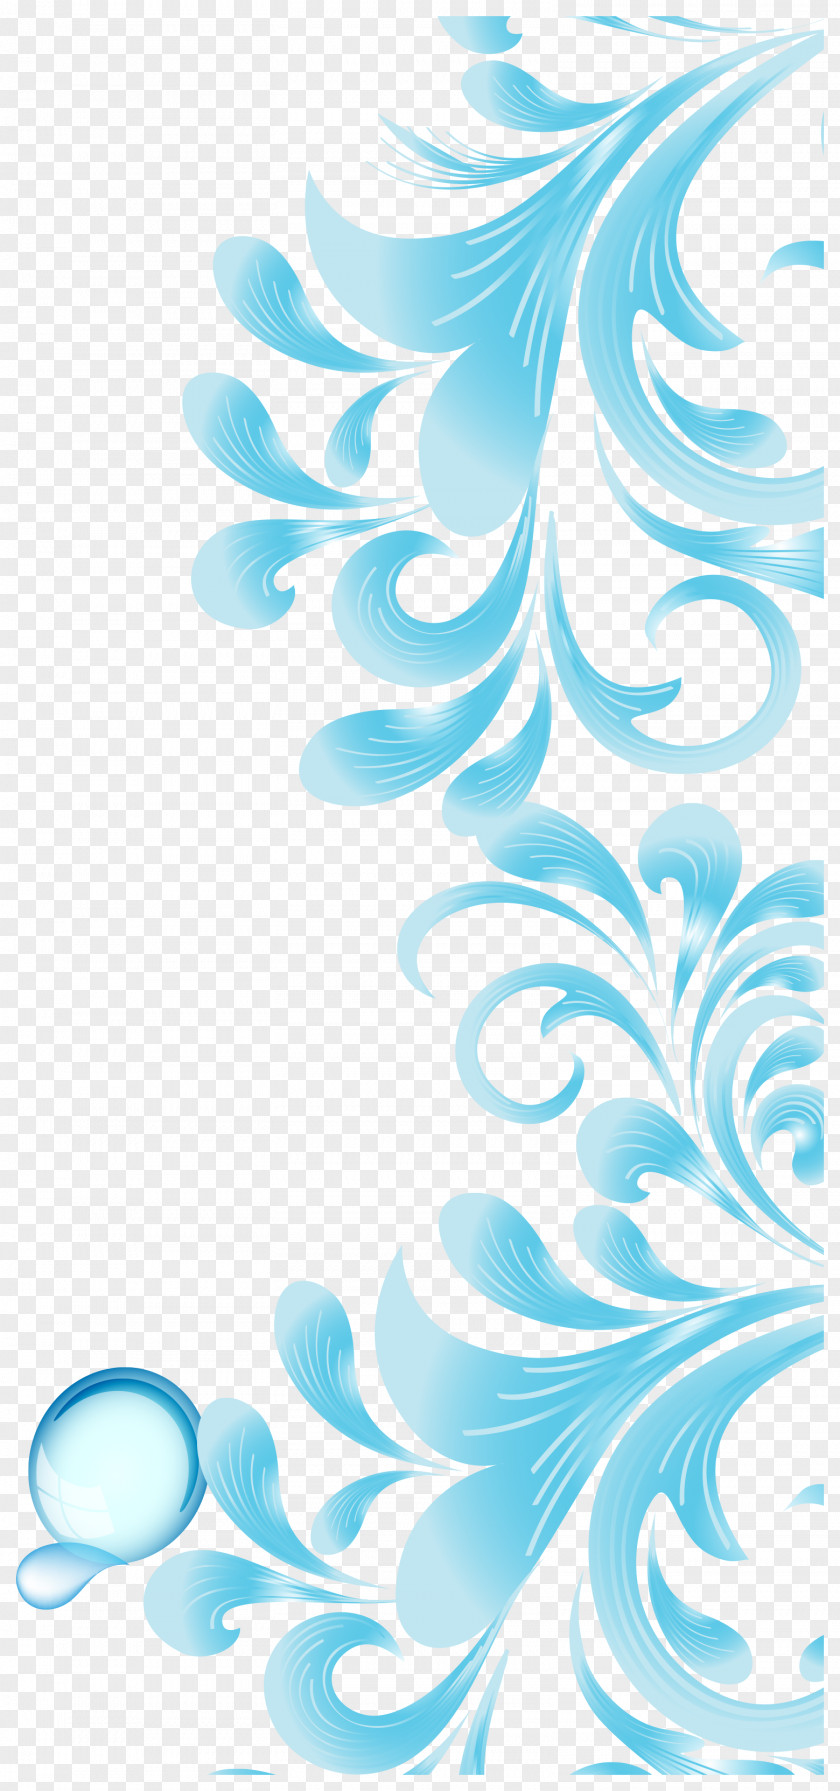 Sky Blue Abstract Pattern Vector Brochure Flyer PNG